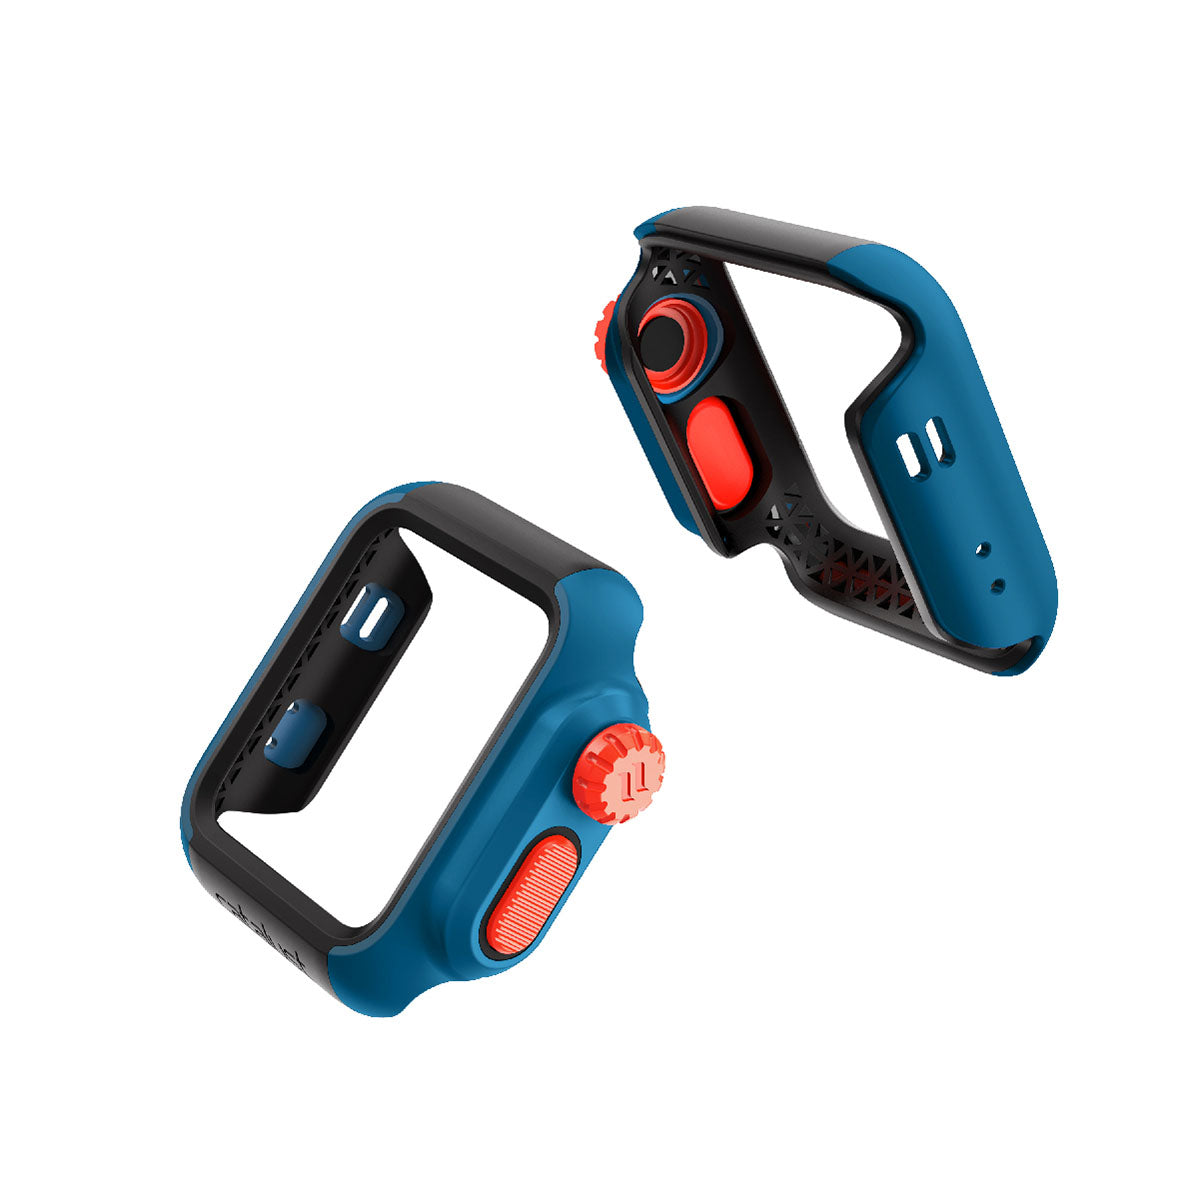 catalyst apple watch series 3 2 38mm impact protection case views of all the sides of the impact protection case blue ridge sunset